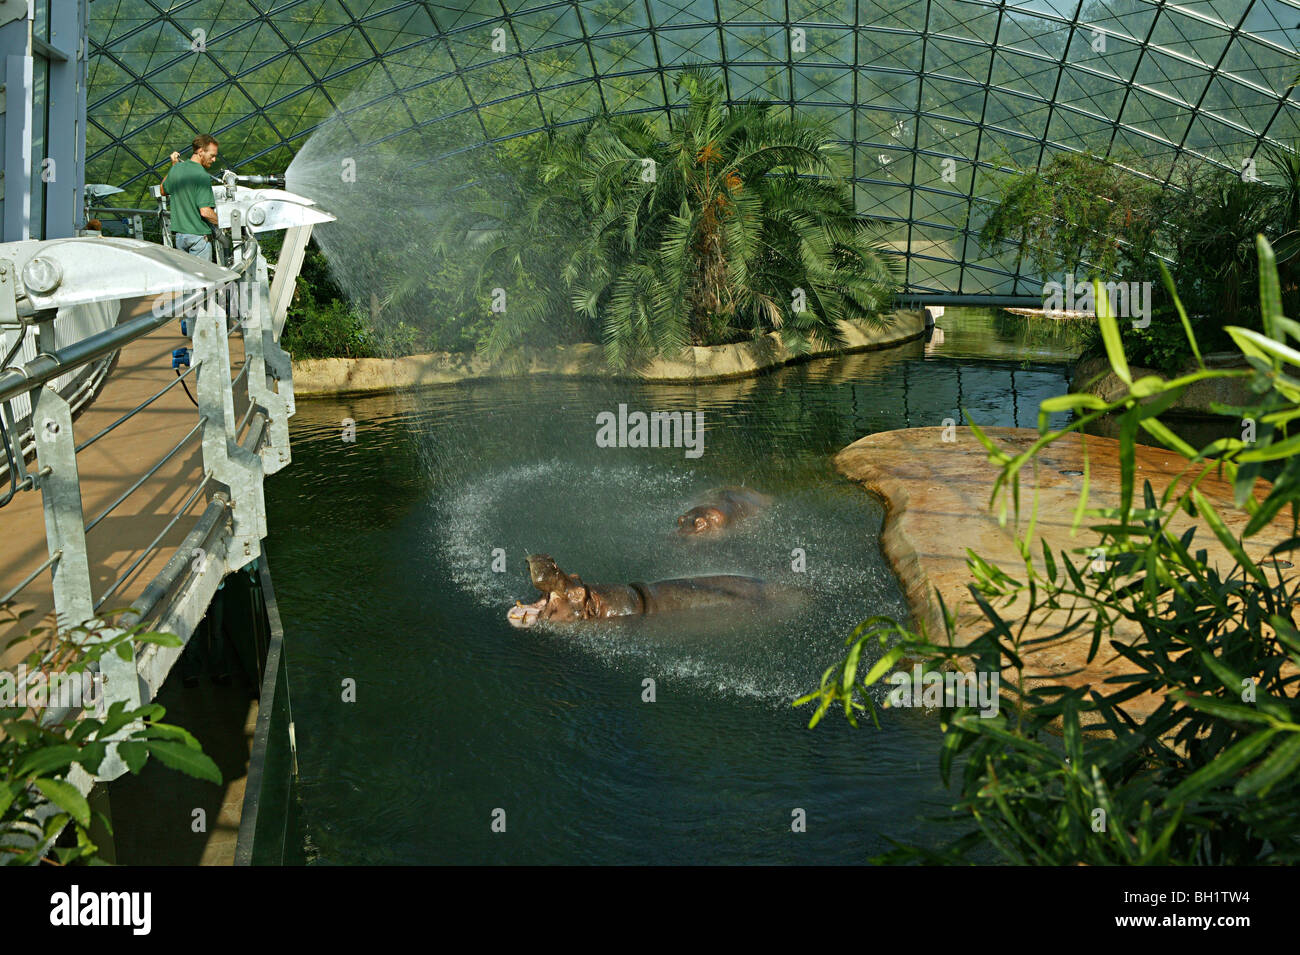 Hippopotamus House, spanned by two fine-meshed glass domes, Zoo Berlin Stock Photo